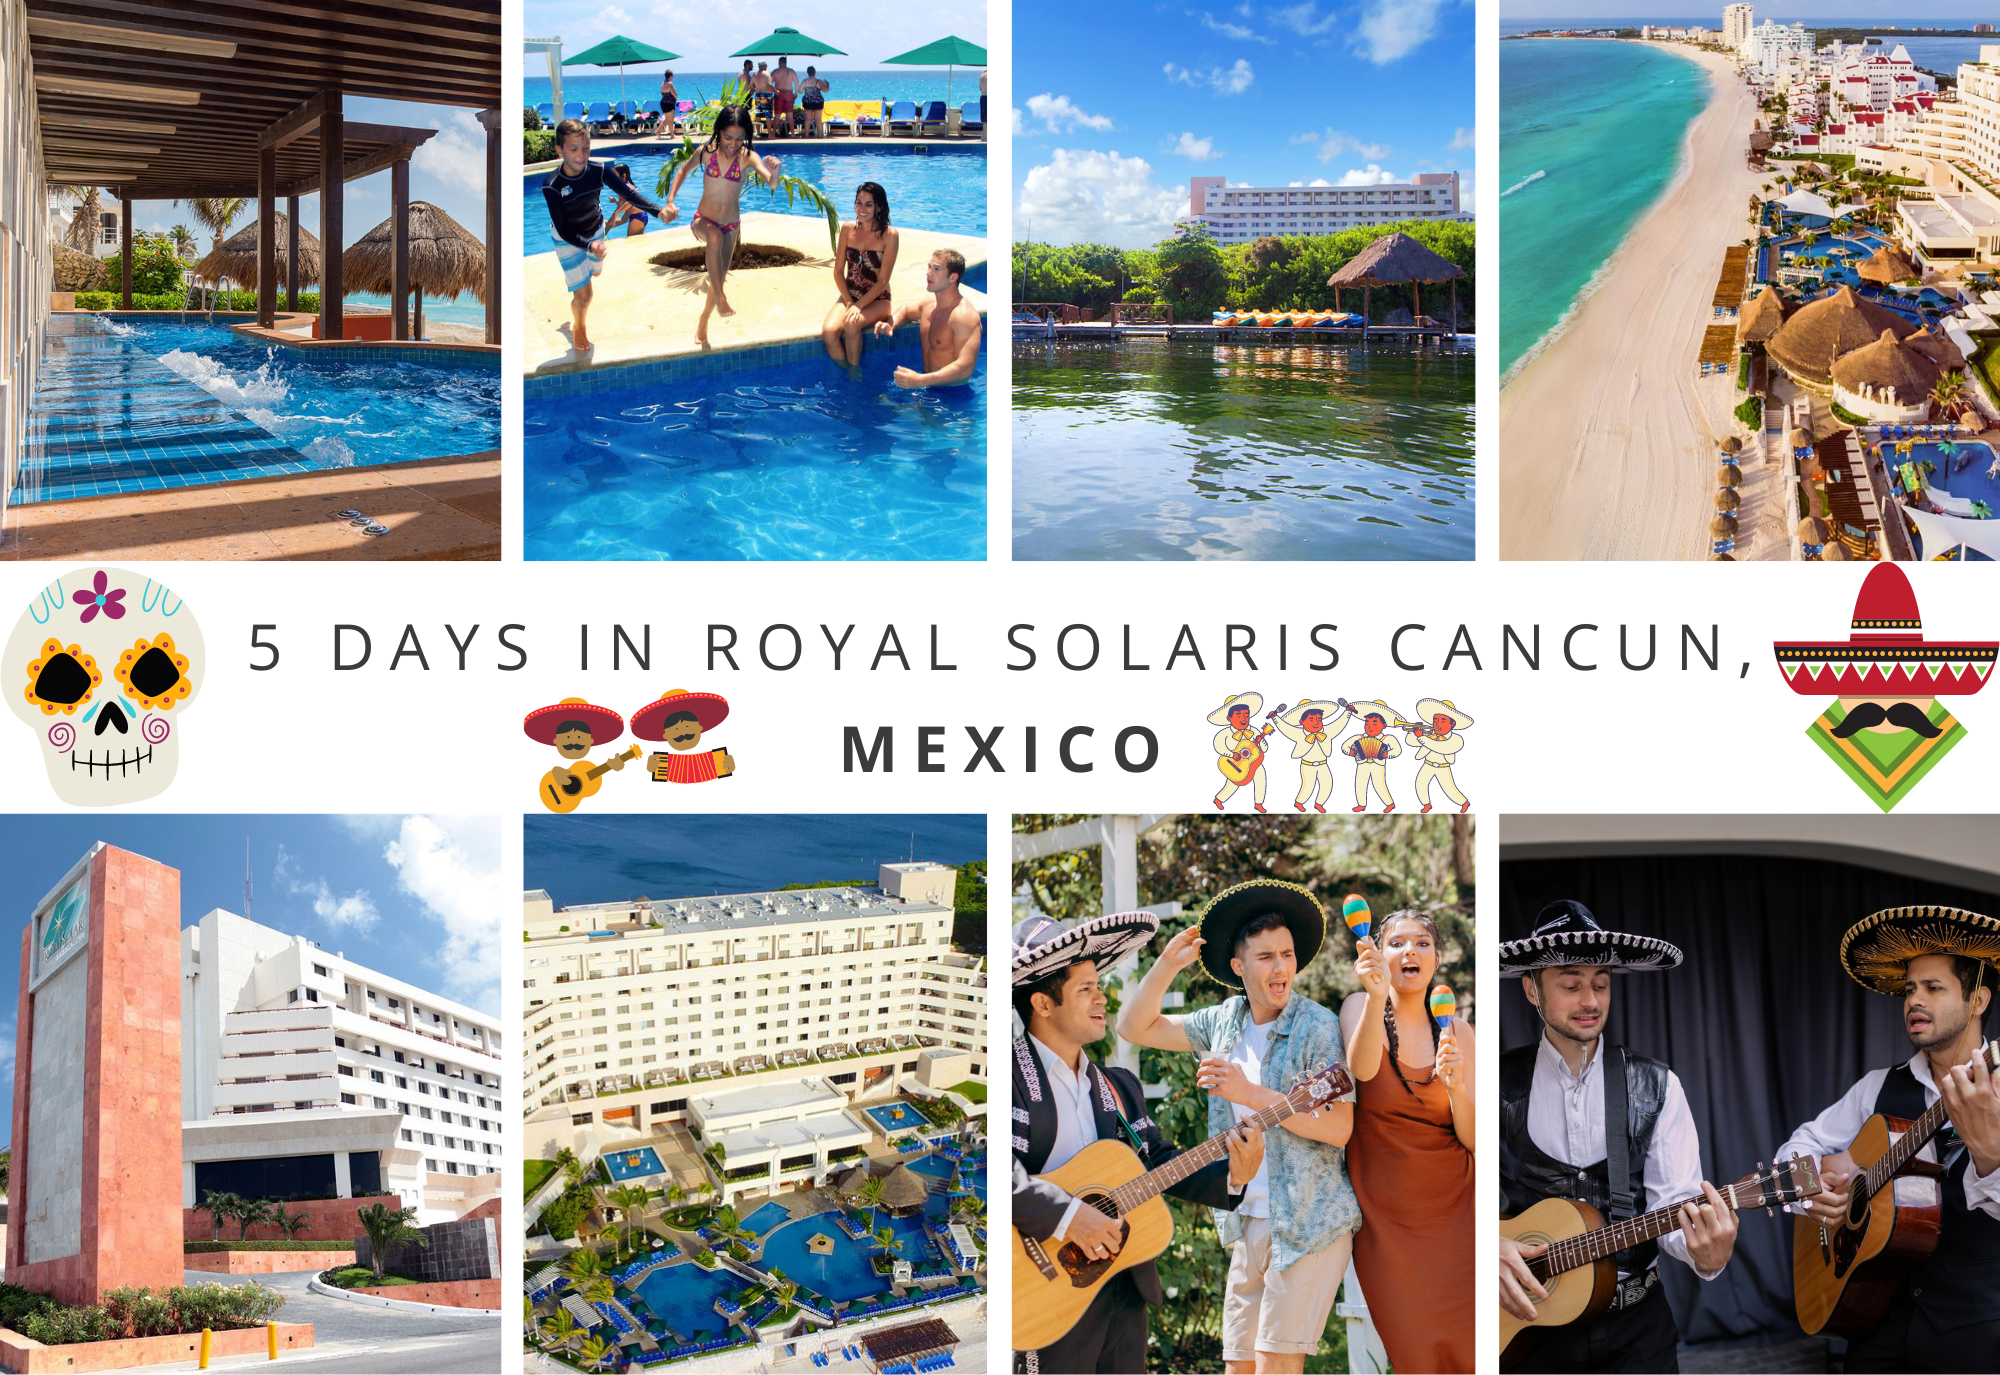 5 Days in Royal Solaris Cancun, Mexico